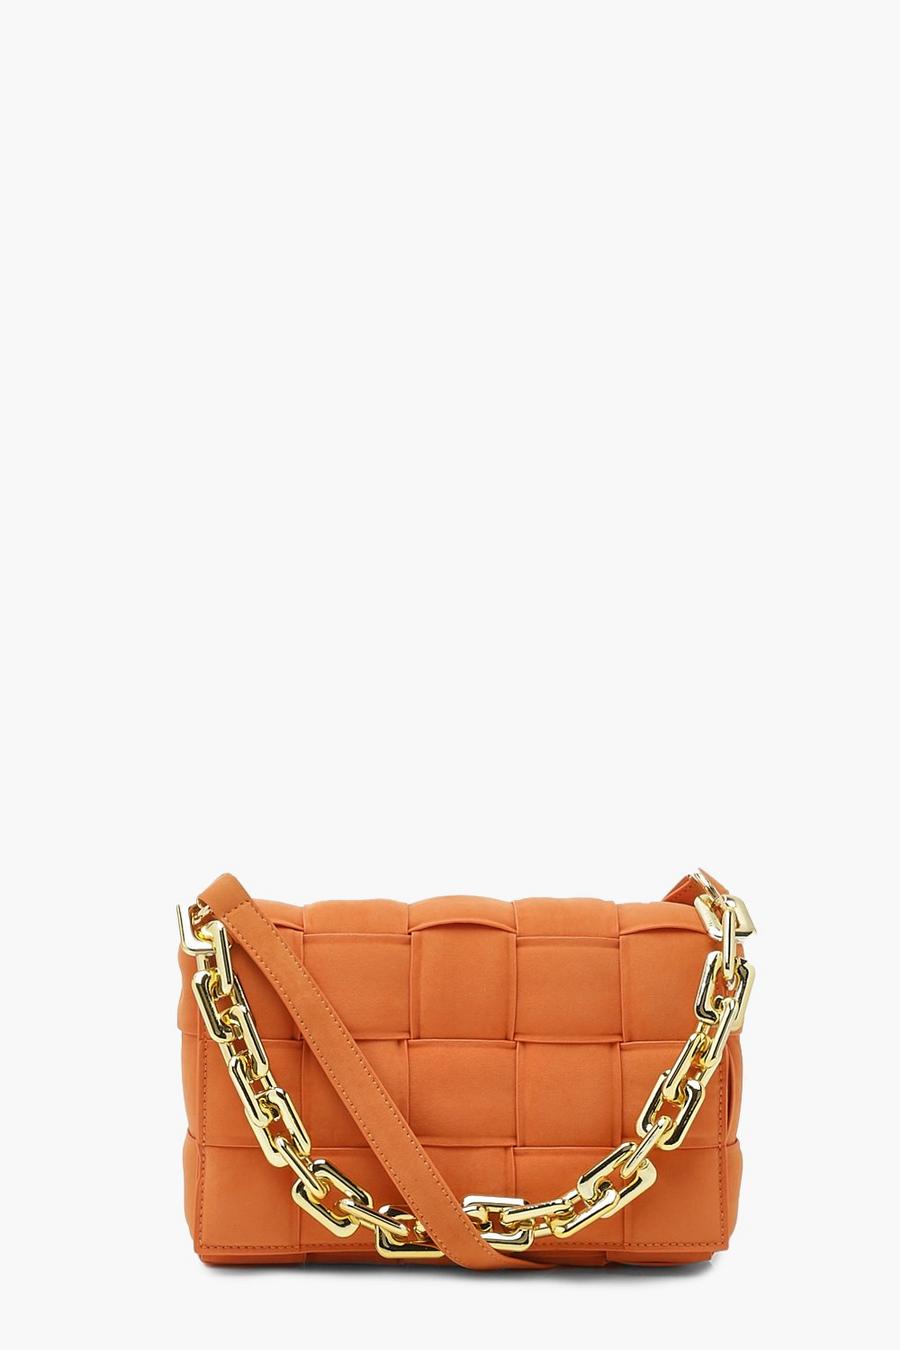  ZHUZHU Your Heart Thick Leather Chain Quilted Shoulder Bag  Crossbody Handbag Ladies Luxury Designer Handbags Ladies (Color : Orange) :  Clothing, Shoes & Jewelry